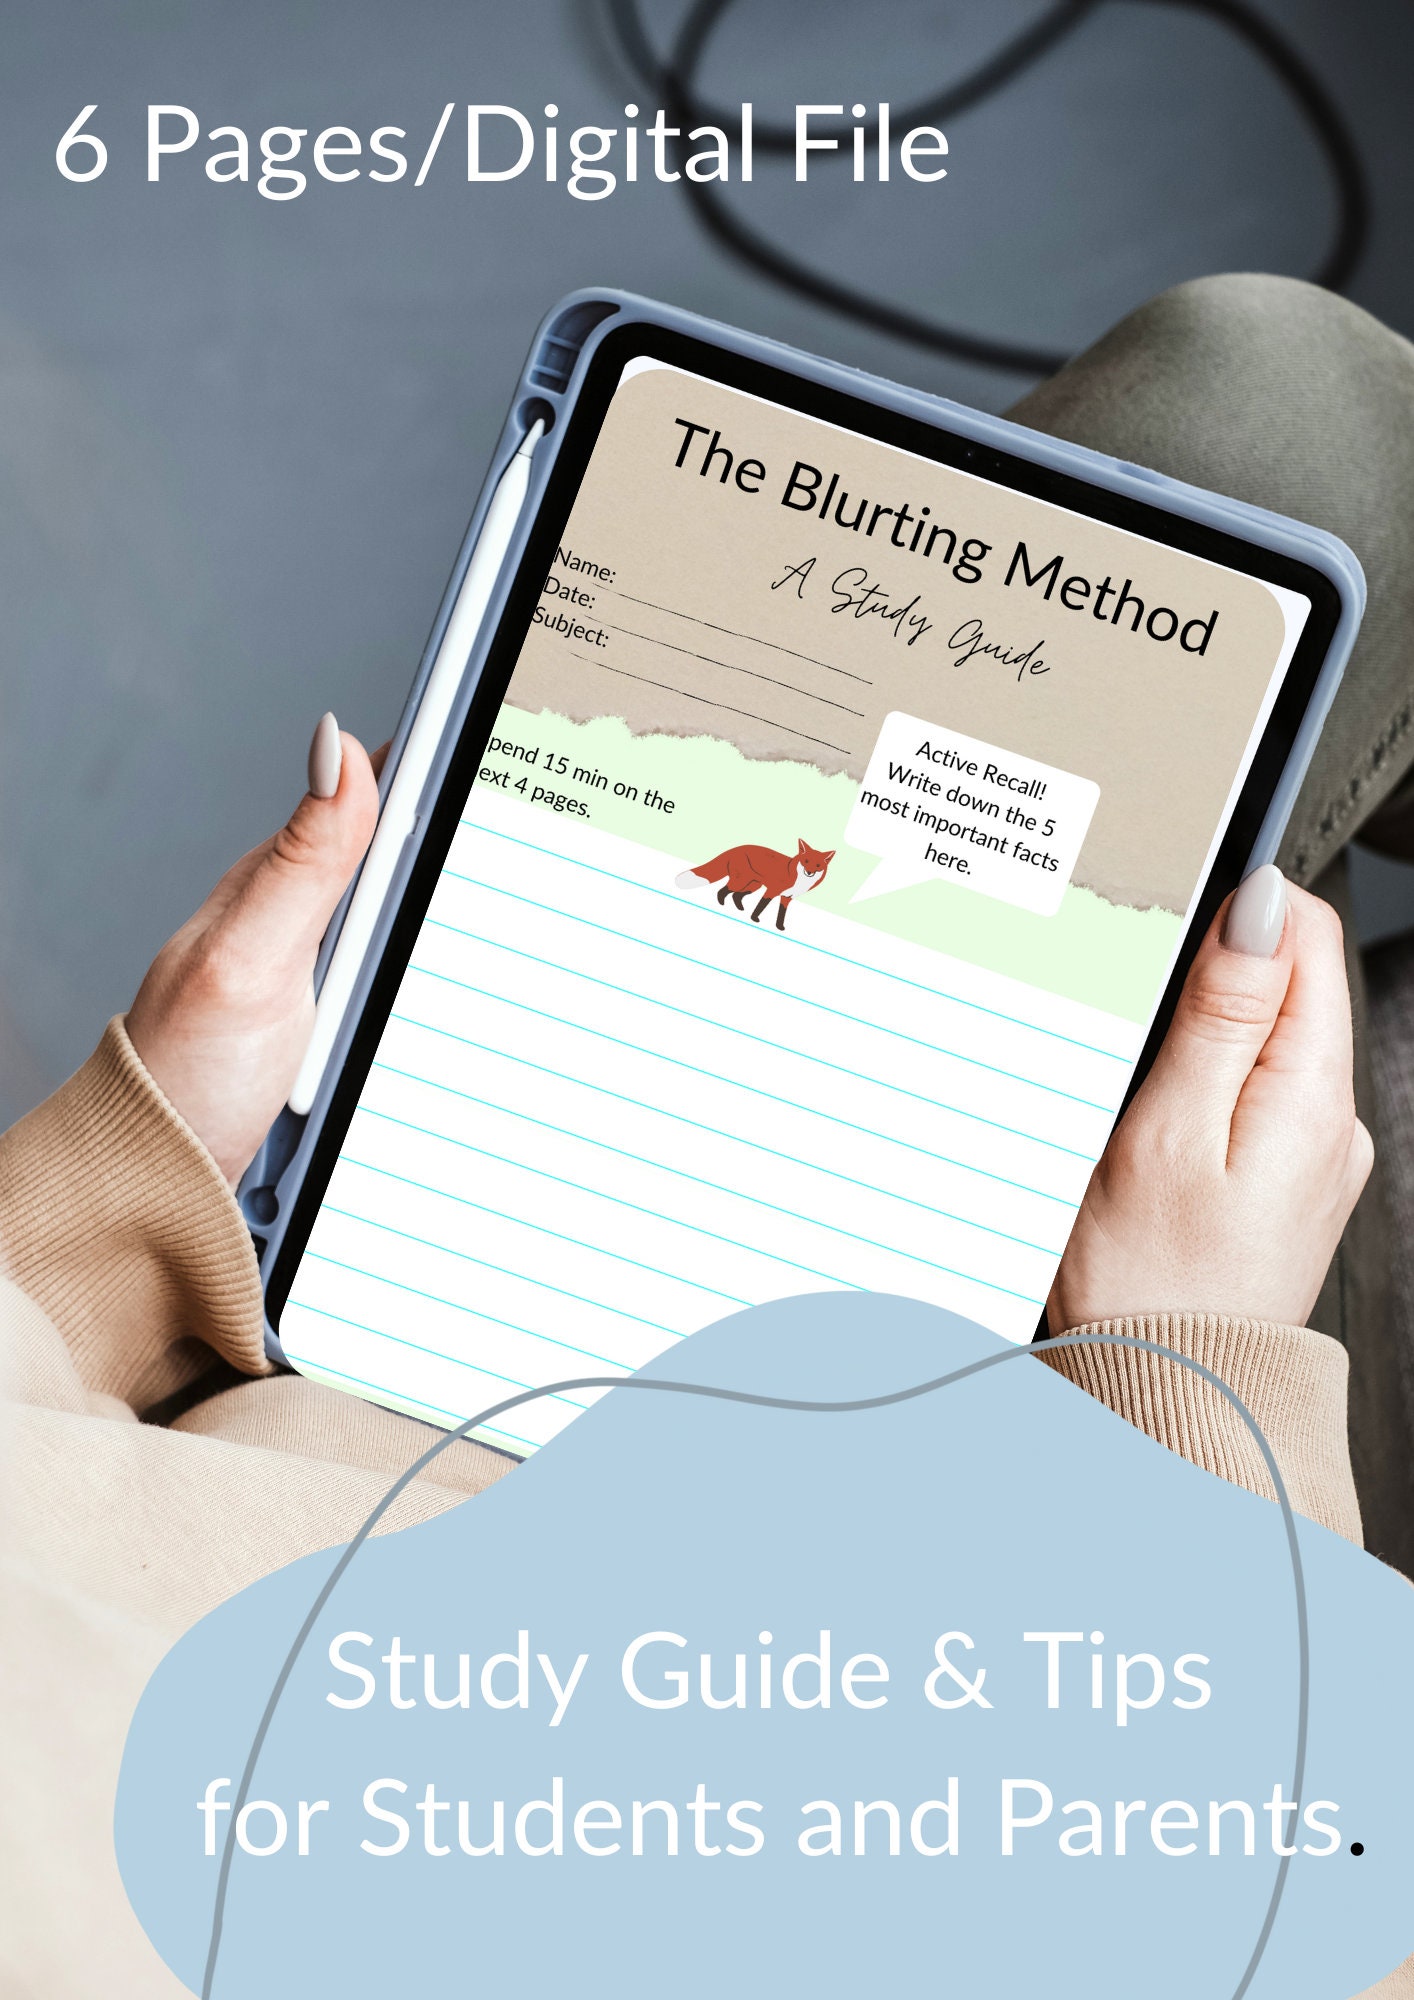 Your　Ace　Revision　the　Etsy　Exam　Study　Guide　With　Blurting　Method.